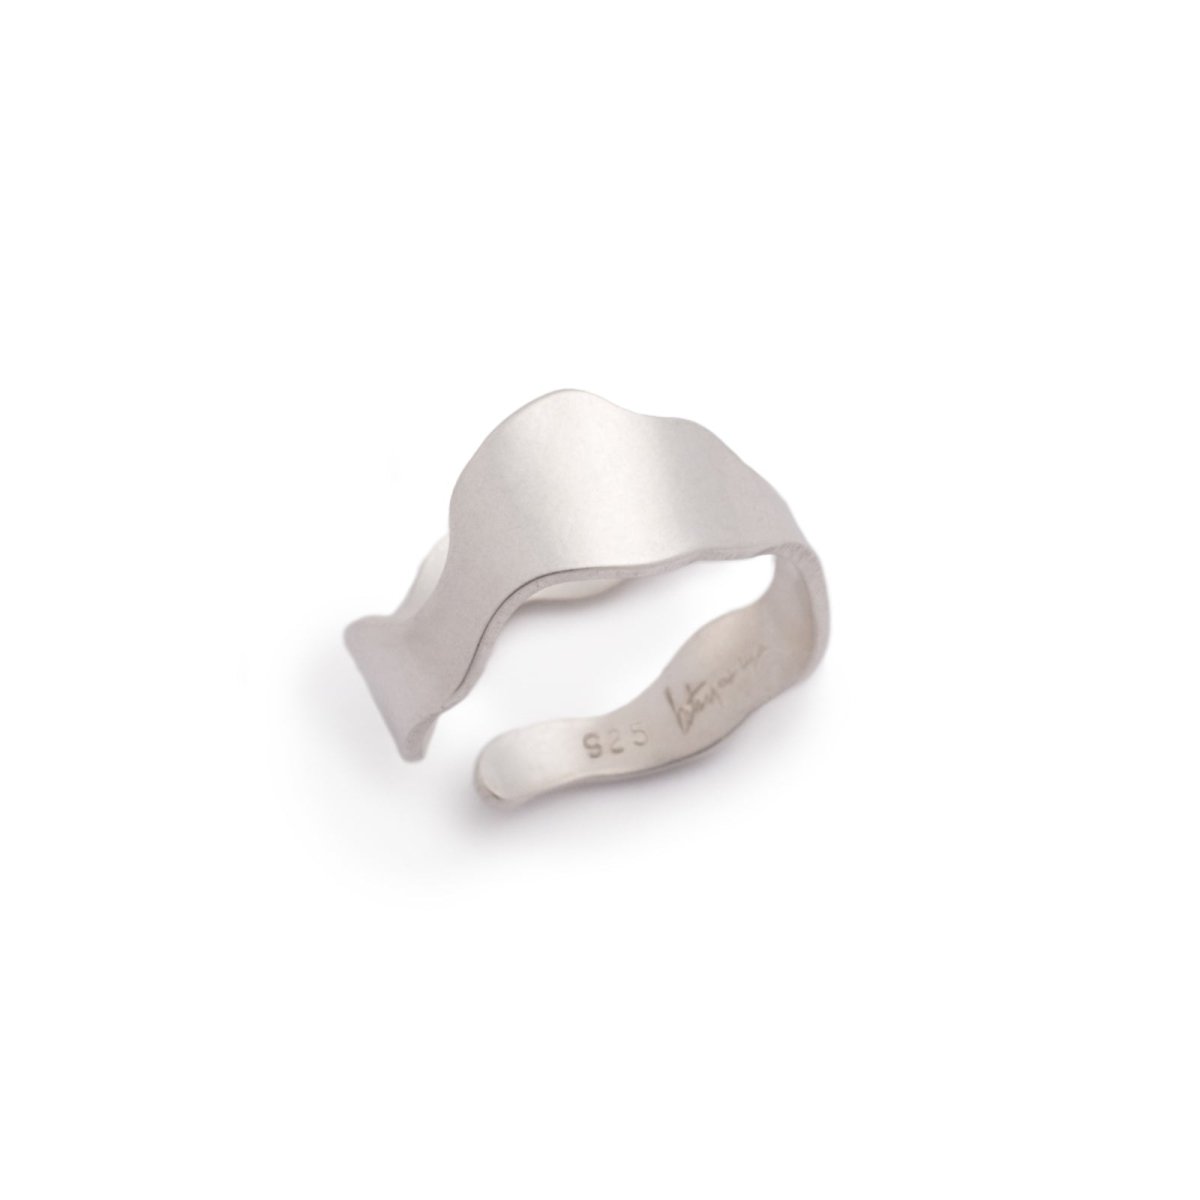 Sleek and simple brushed sterling silver adjustable ring, featuring a wavy shape inspired by Portland's Willamette River and the betsy & iya logo etched inside the band. Hand-crafted in Portland, Oregon. 